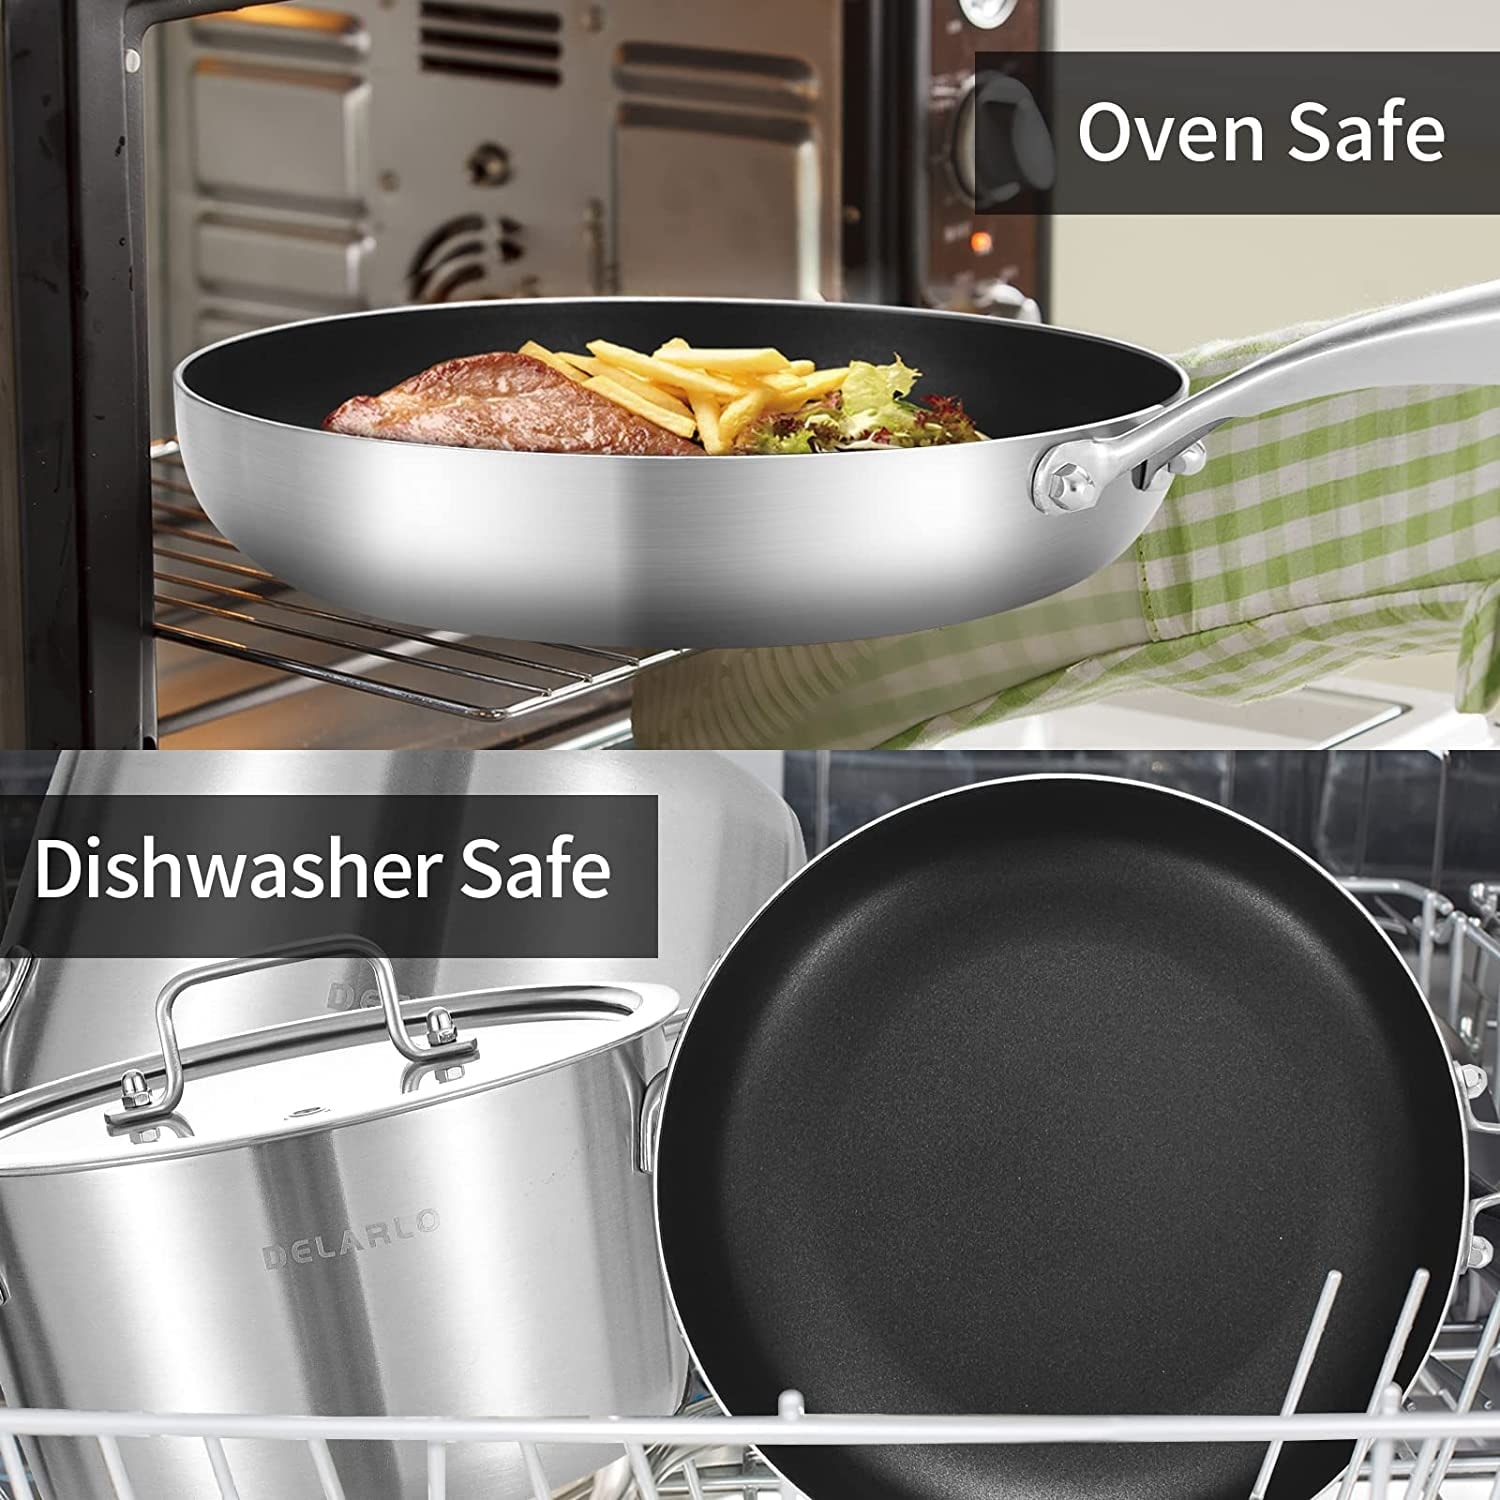 https://ak1.ostkcdn.com/images/products/is/images/direct/851b53fb4d0d7b4b64b465f77efc3550d24acf78/Whole-body-Tri-Ply-Stainless-Steel-cookware-sets-kitchen-pots-and-pans-set-7-Piece.jpg